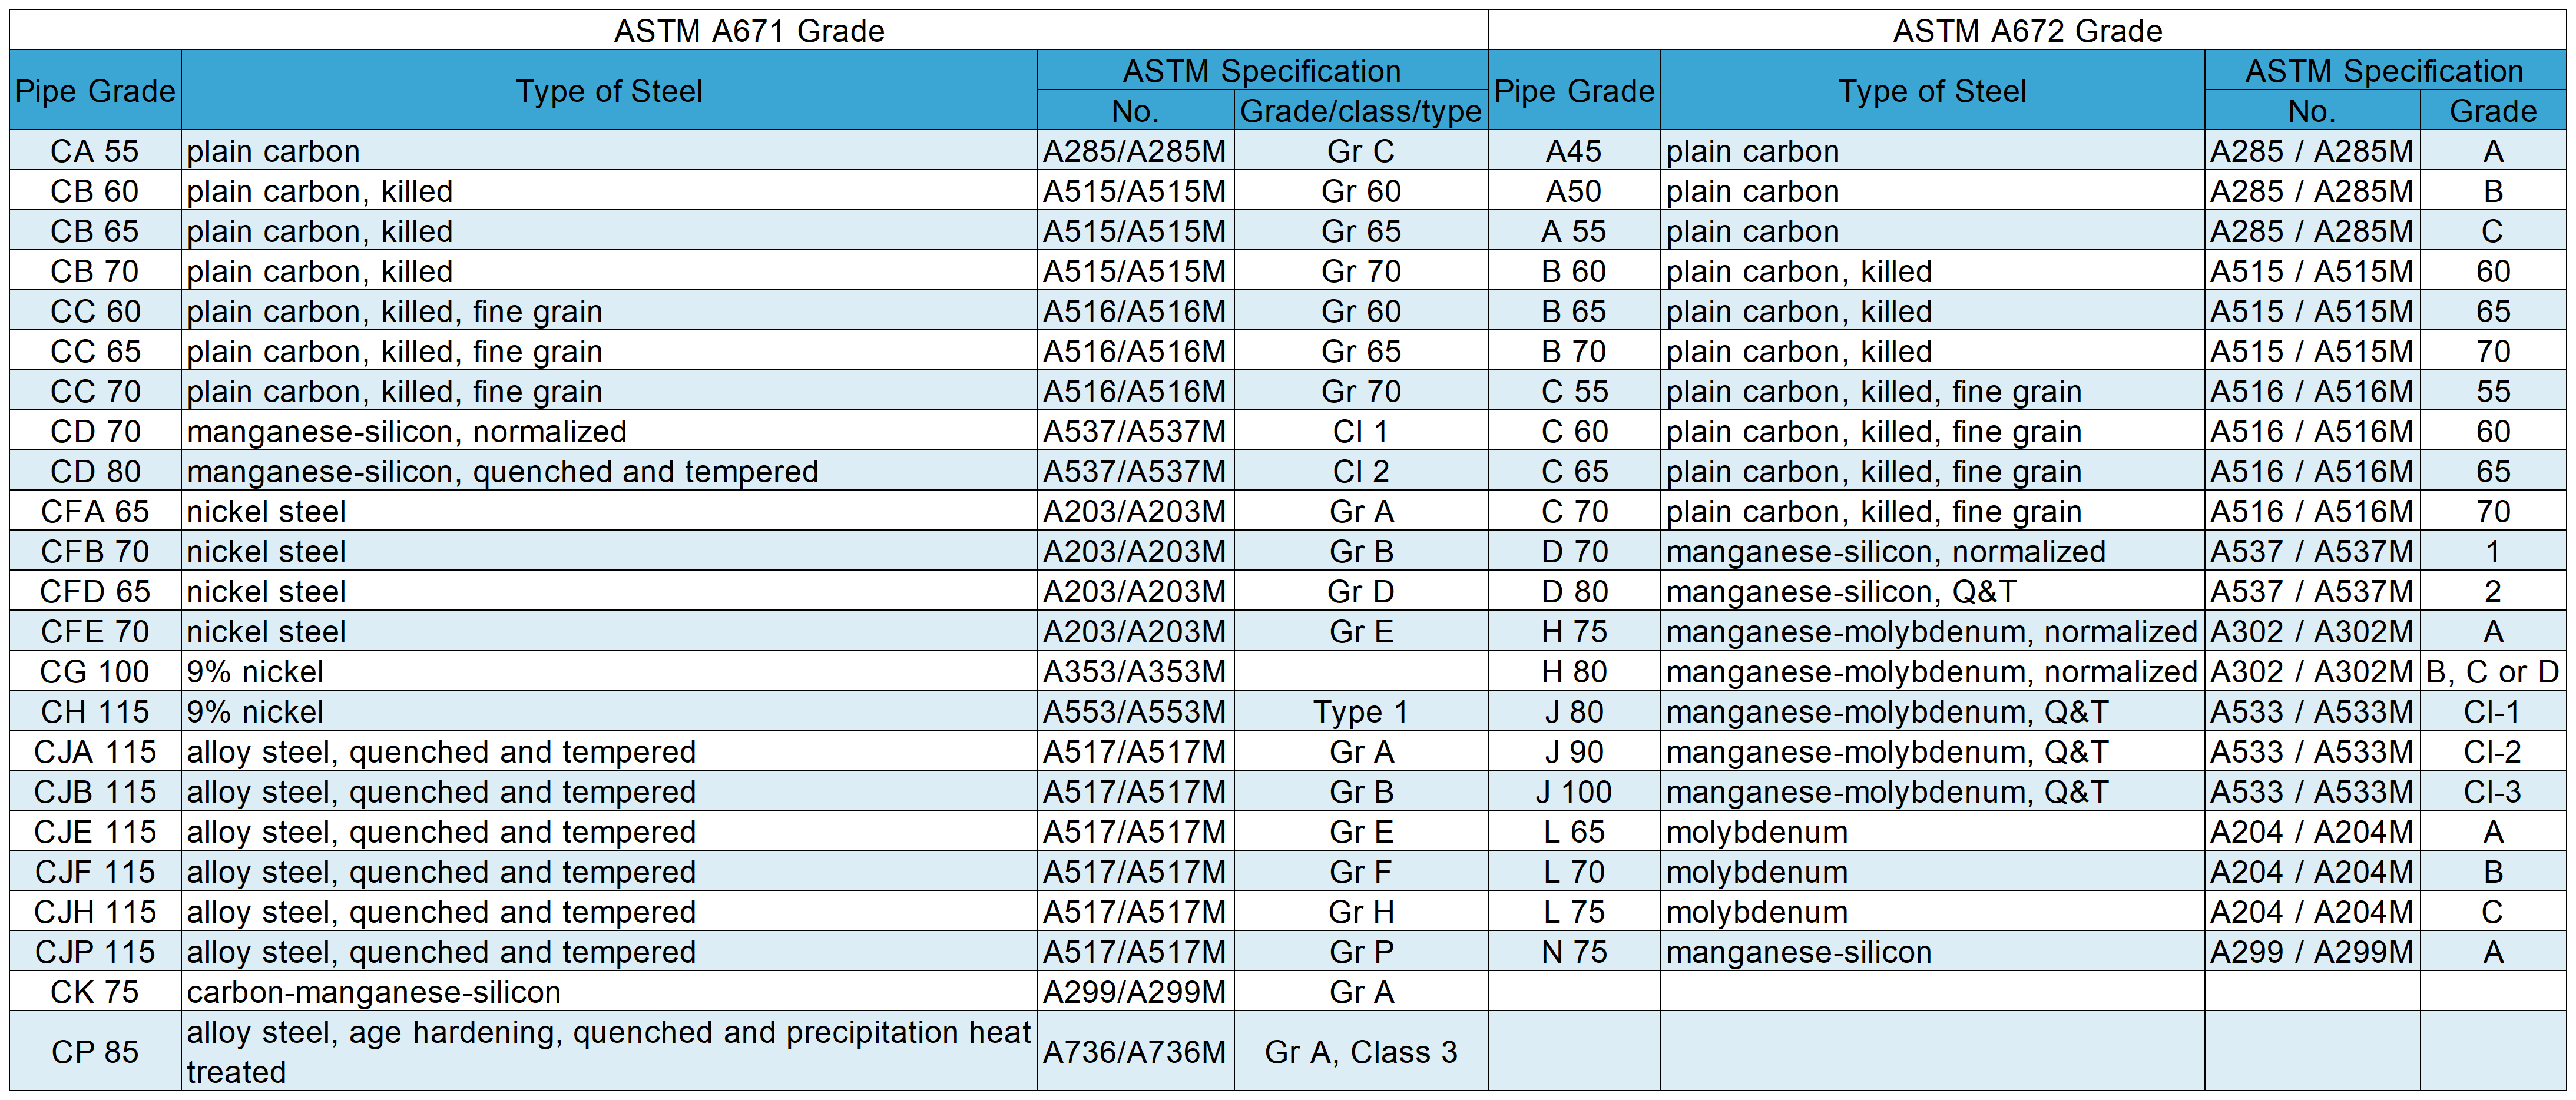 astm a671 is different from a672: grade